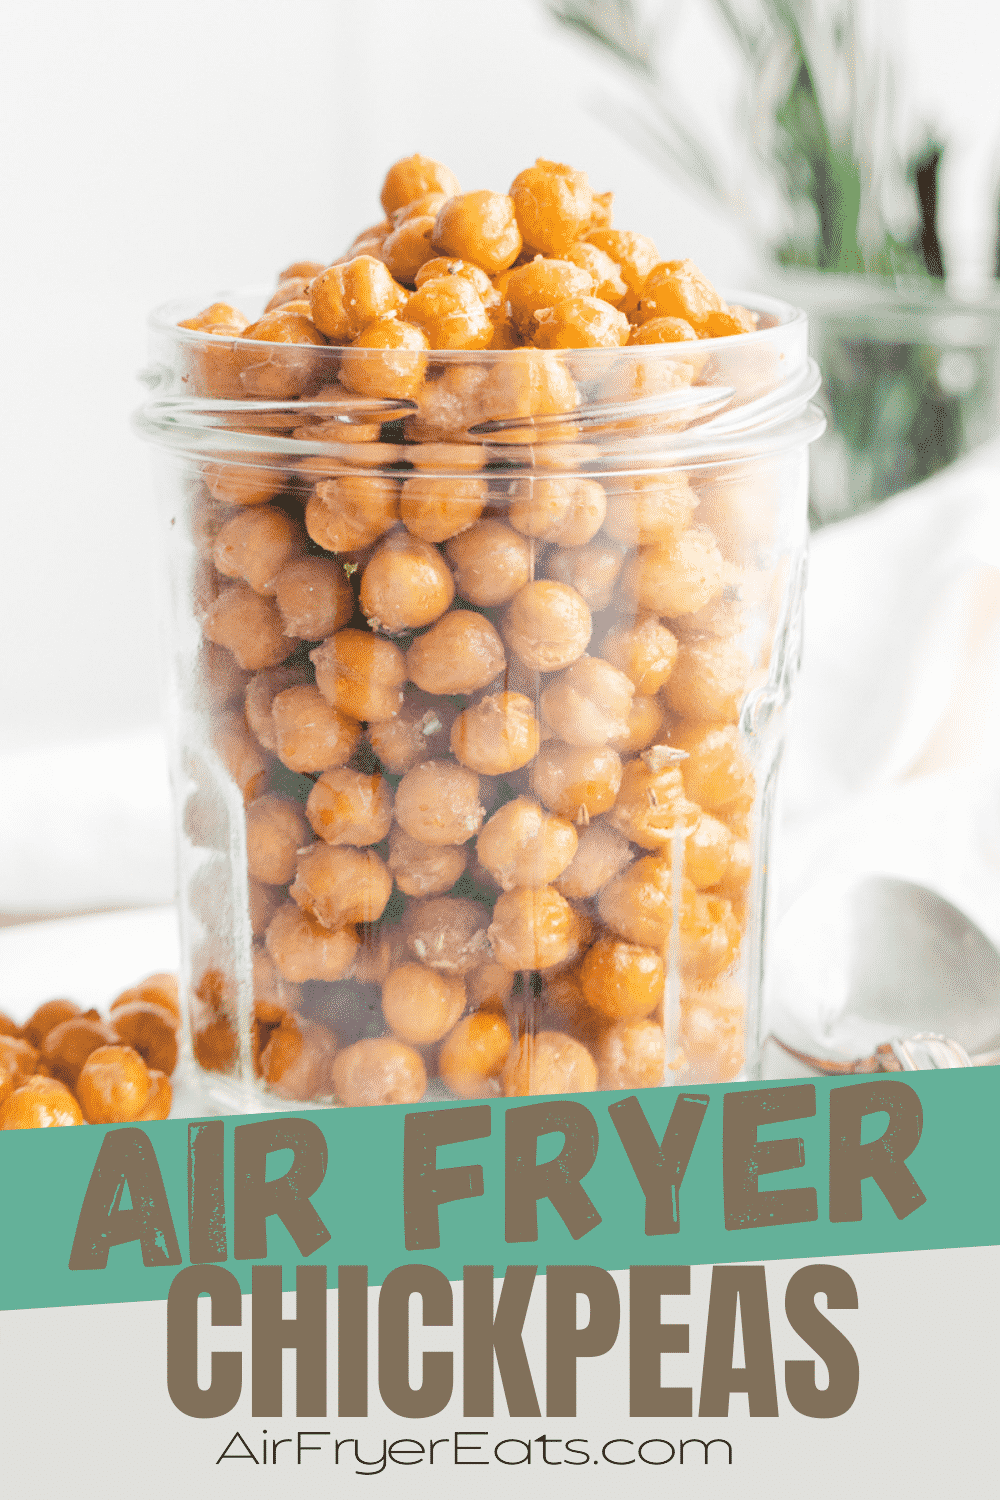 Air Fryer Chickpeas are seasoned with garlic and rosemary and roasted in the air fryer to create the perfect healthy snack. #airfryer #chickpeas via @vegetarianmamma